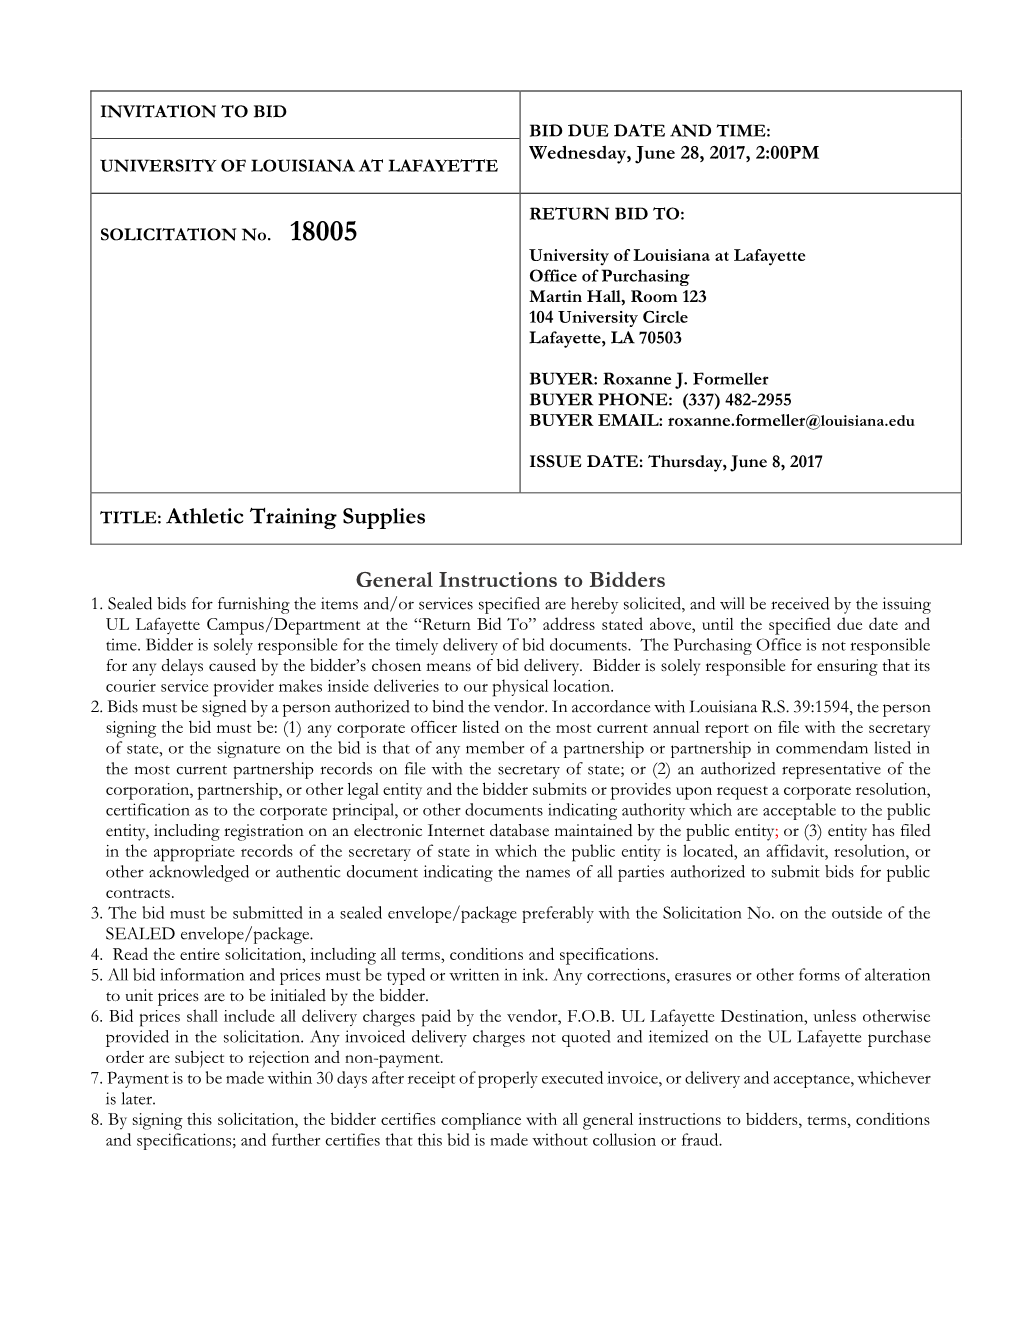 TITLE: Athletic Training Supplies General Instructions to Bidders